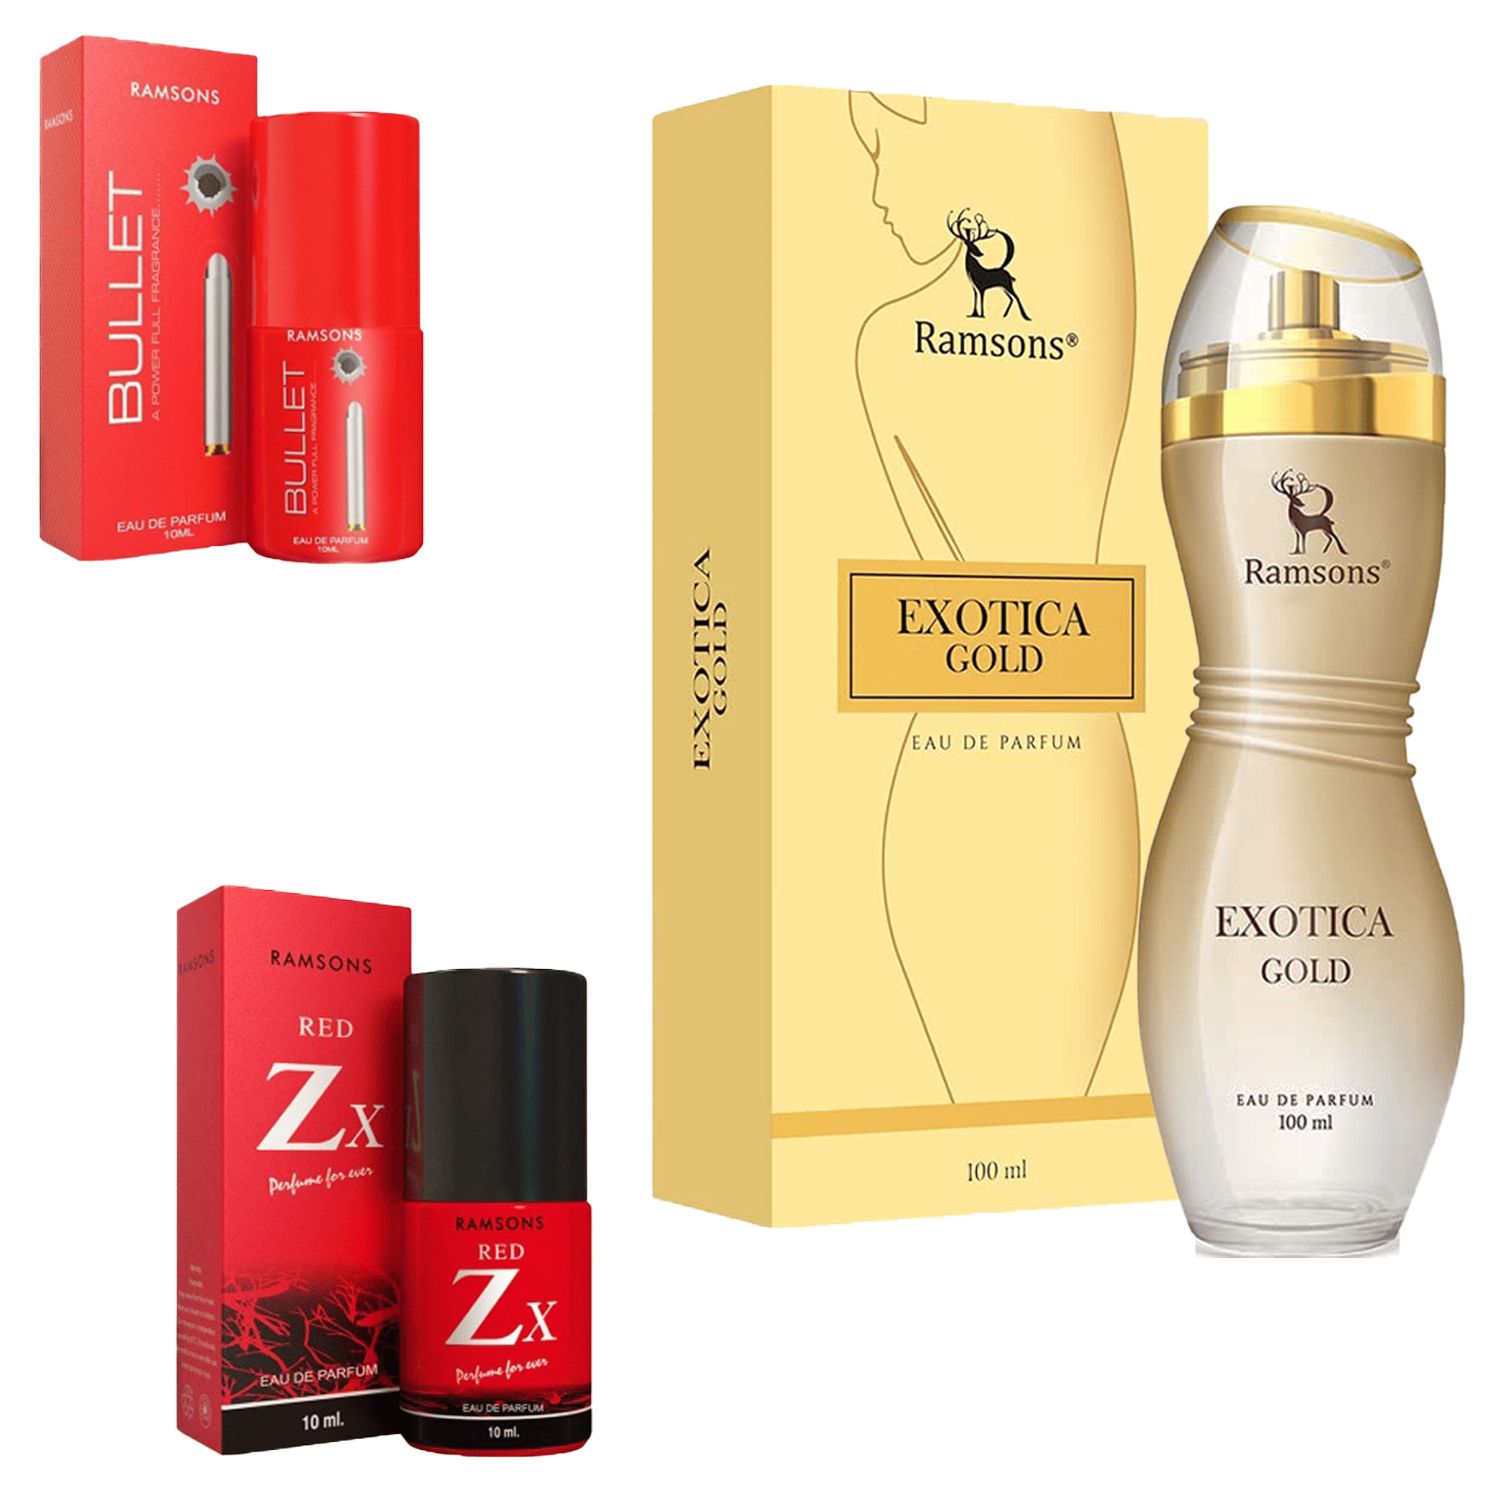 1 RAMSONS EXOTICA GOLD PERFUME 100 ML+1 RAMSONS RED ZX PERFUME 10 ML+1 RAMSONS BULLET PERFUME 10 ML